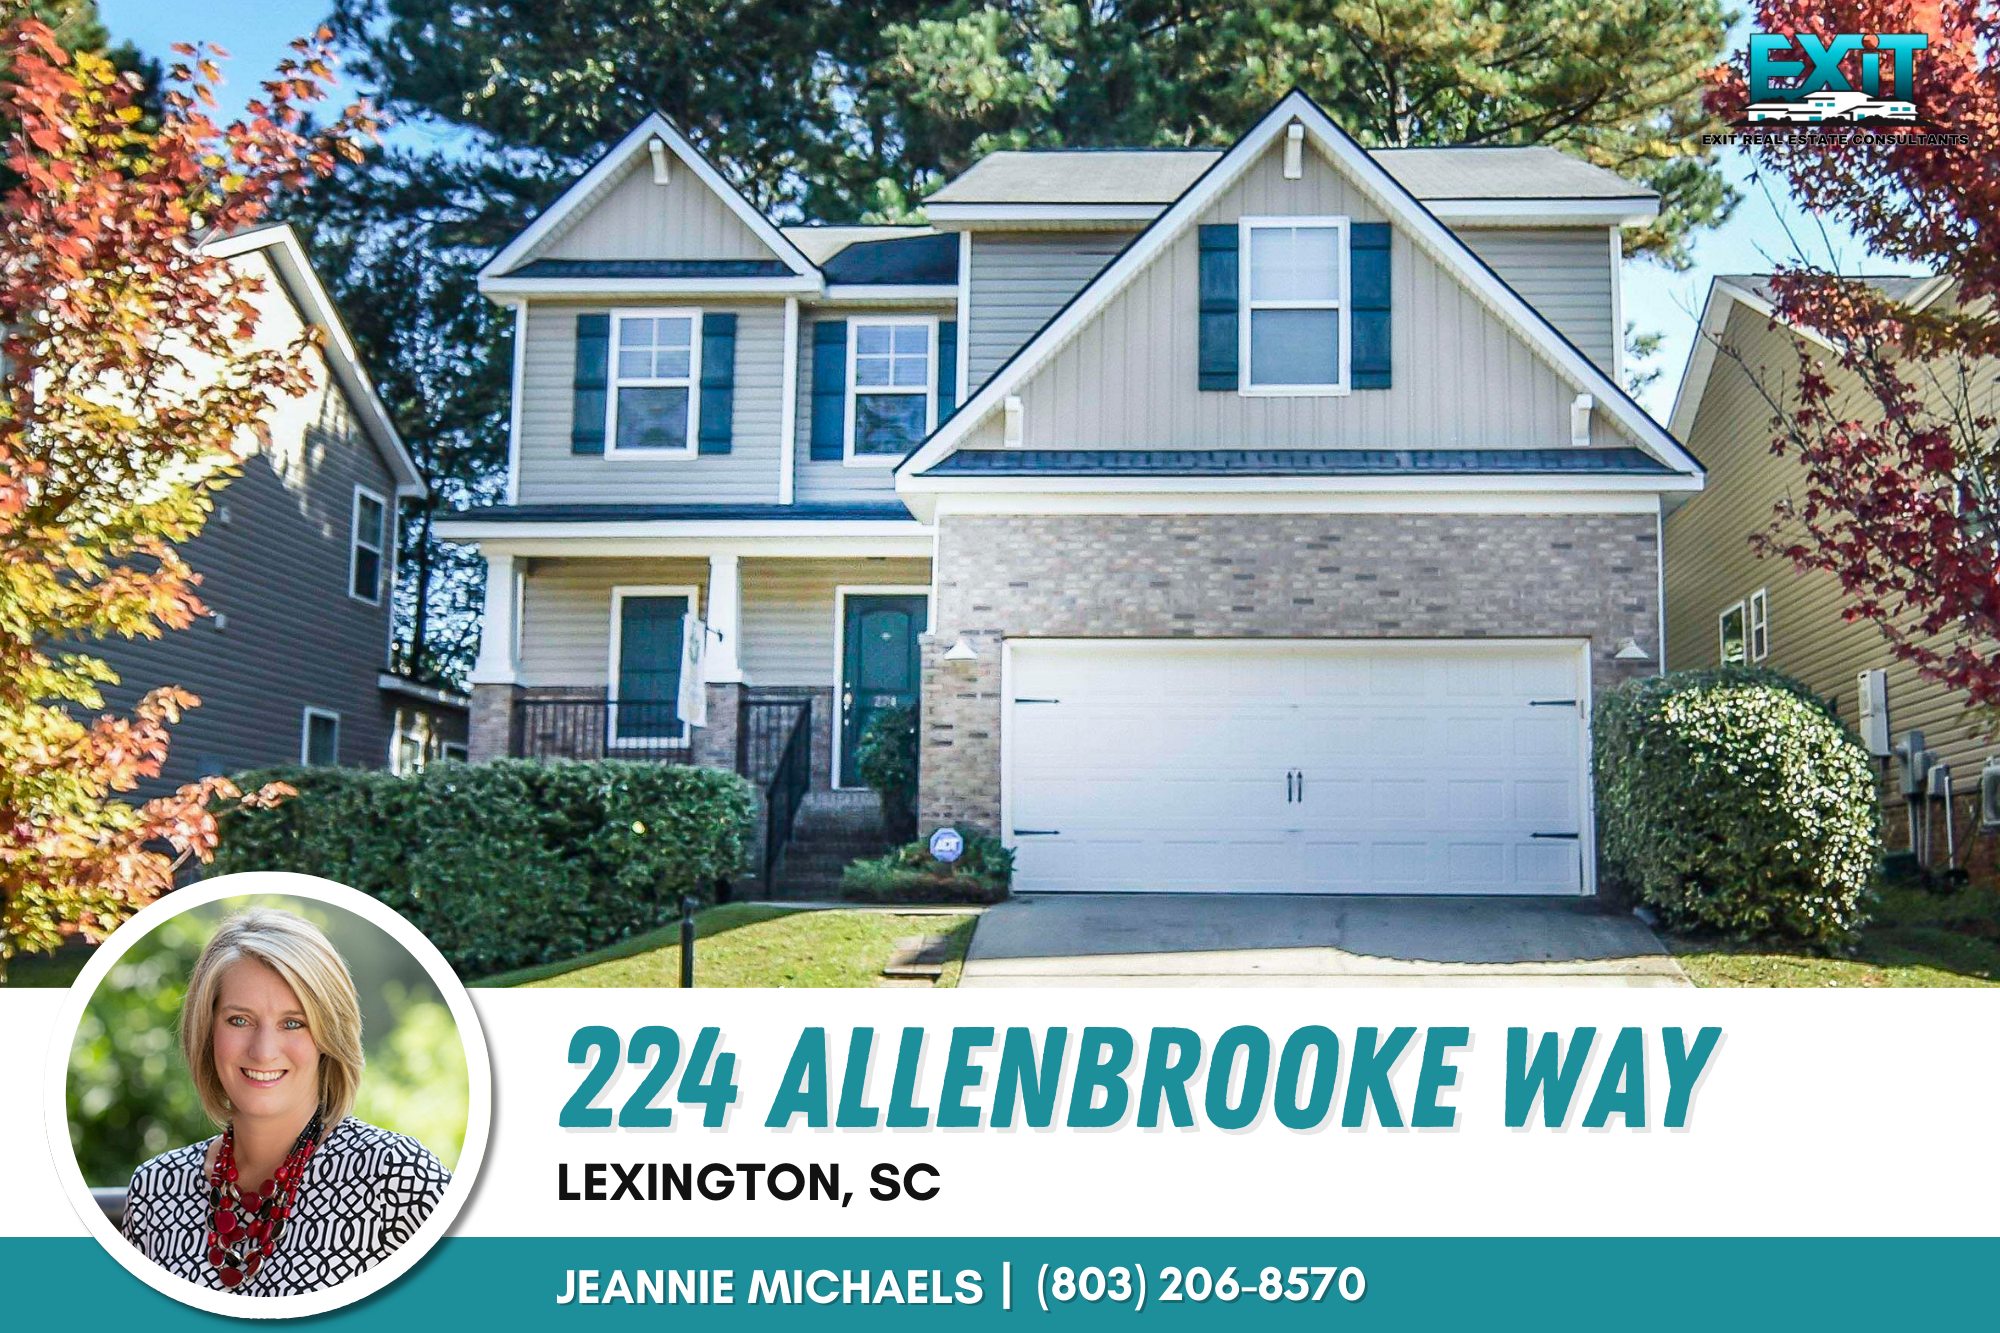 Just listed in Wellesley - Lexington